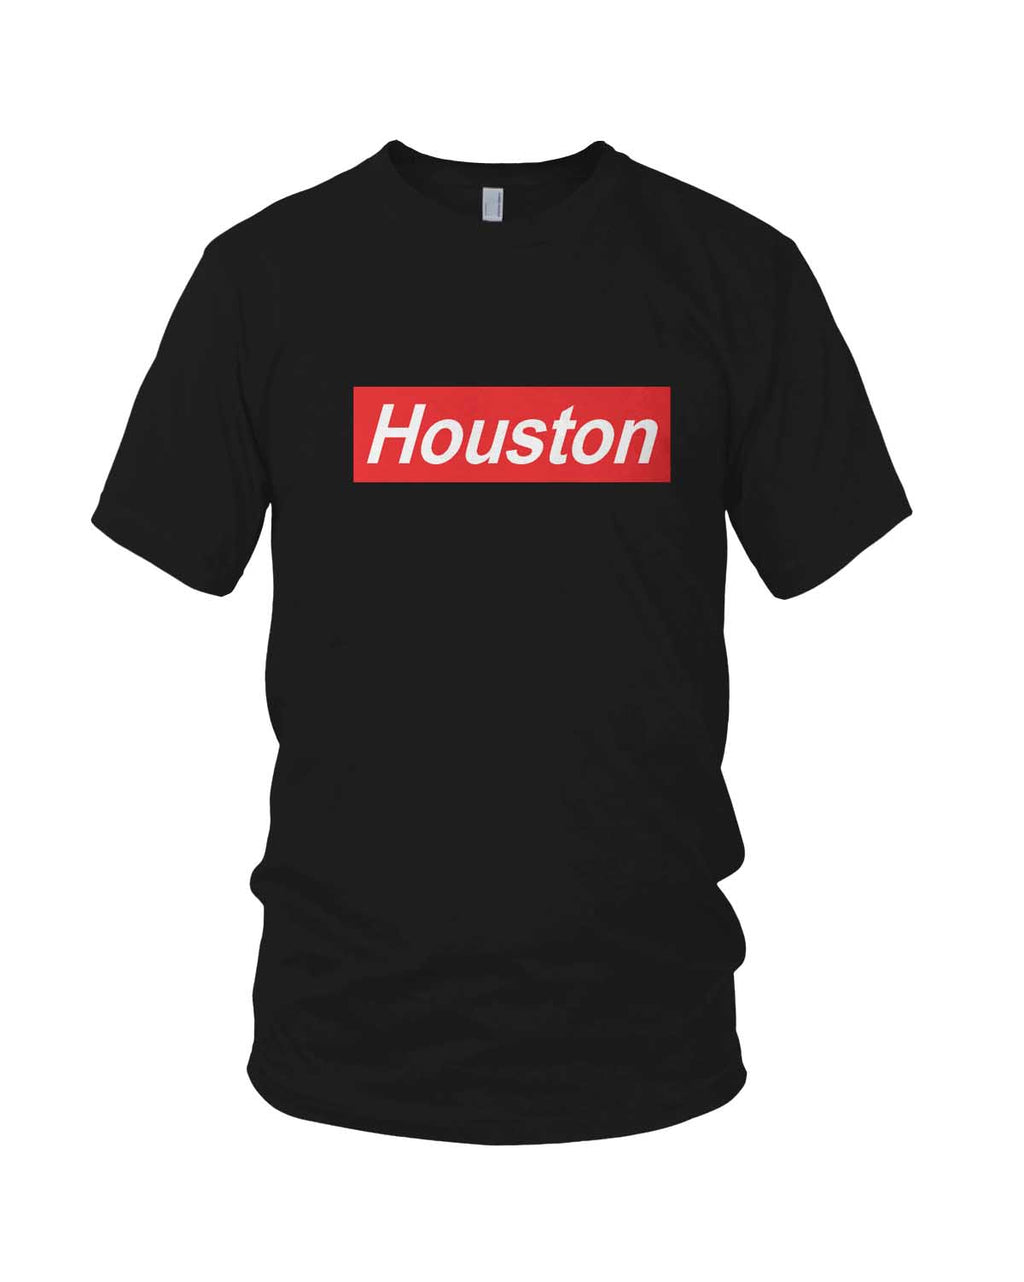 BE Someone Houston shirt from Ugly Guppy – Ugly Guppy